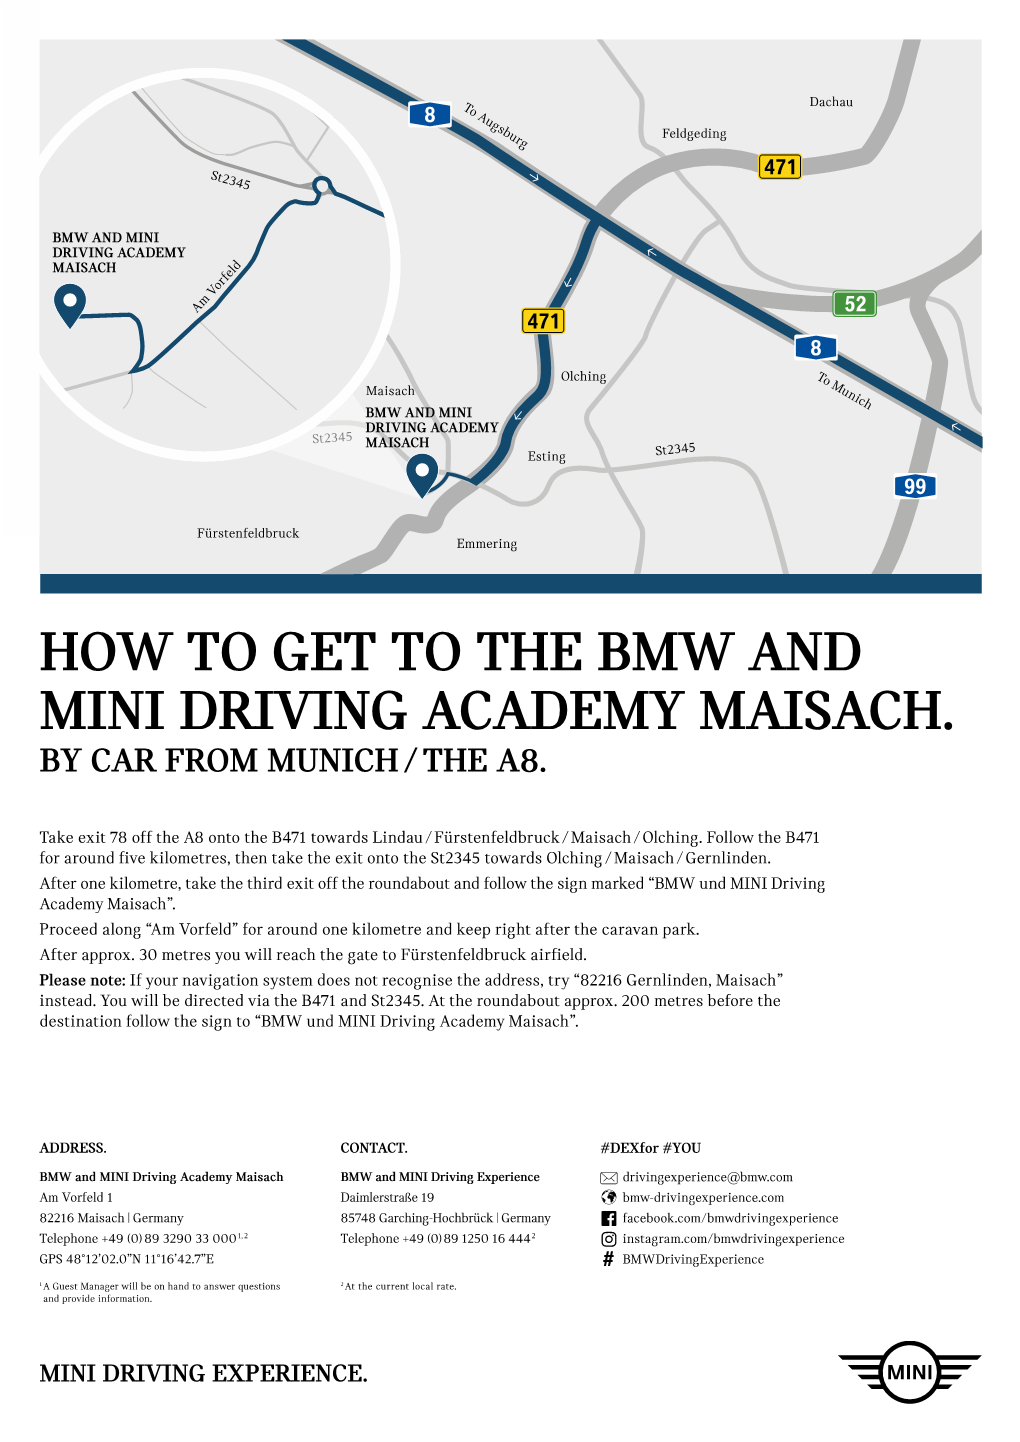 How to Get to the Bmw and Mini Driving Academy Maisach. by Car from Munich / the A8